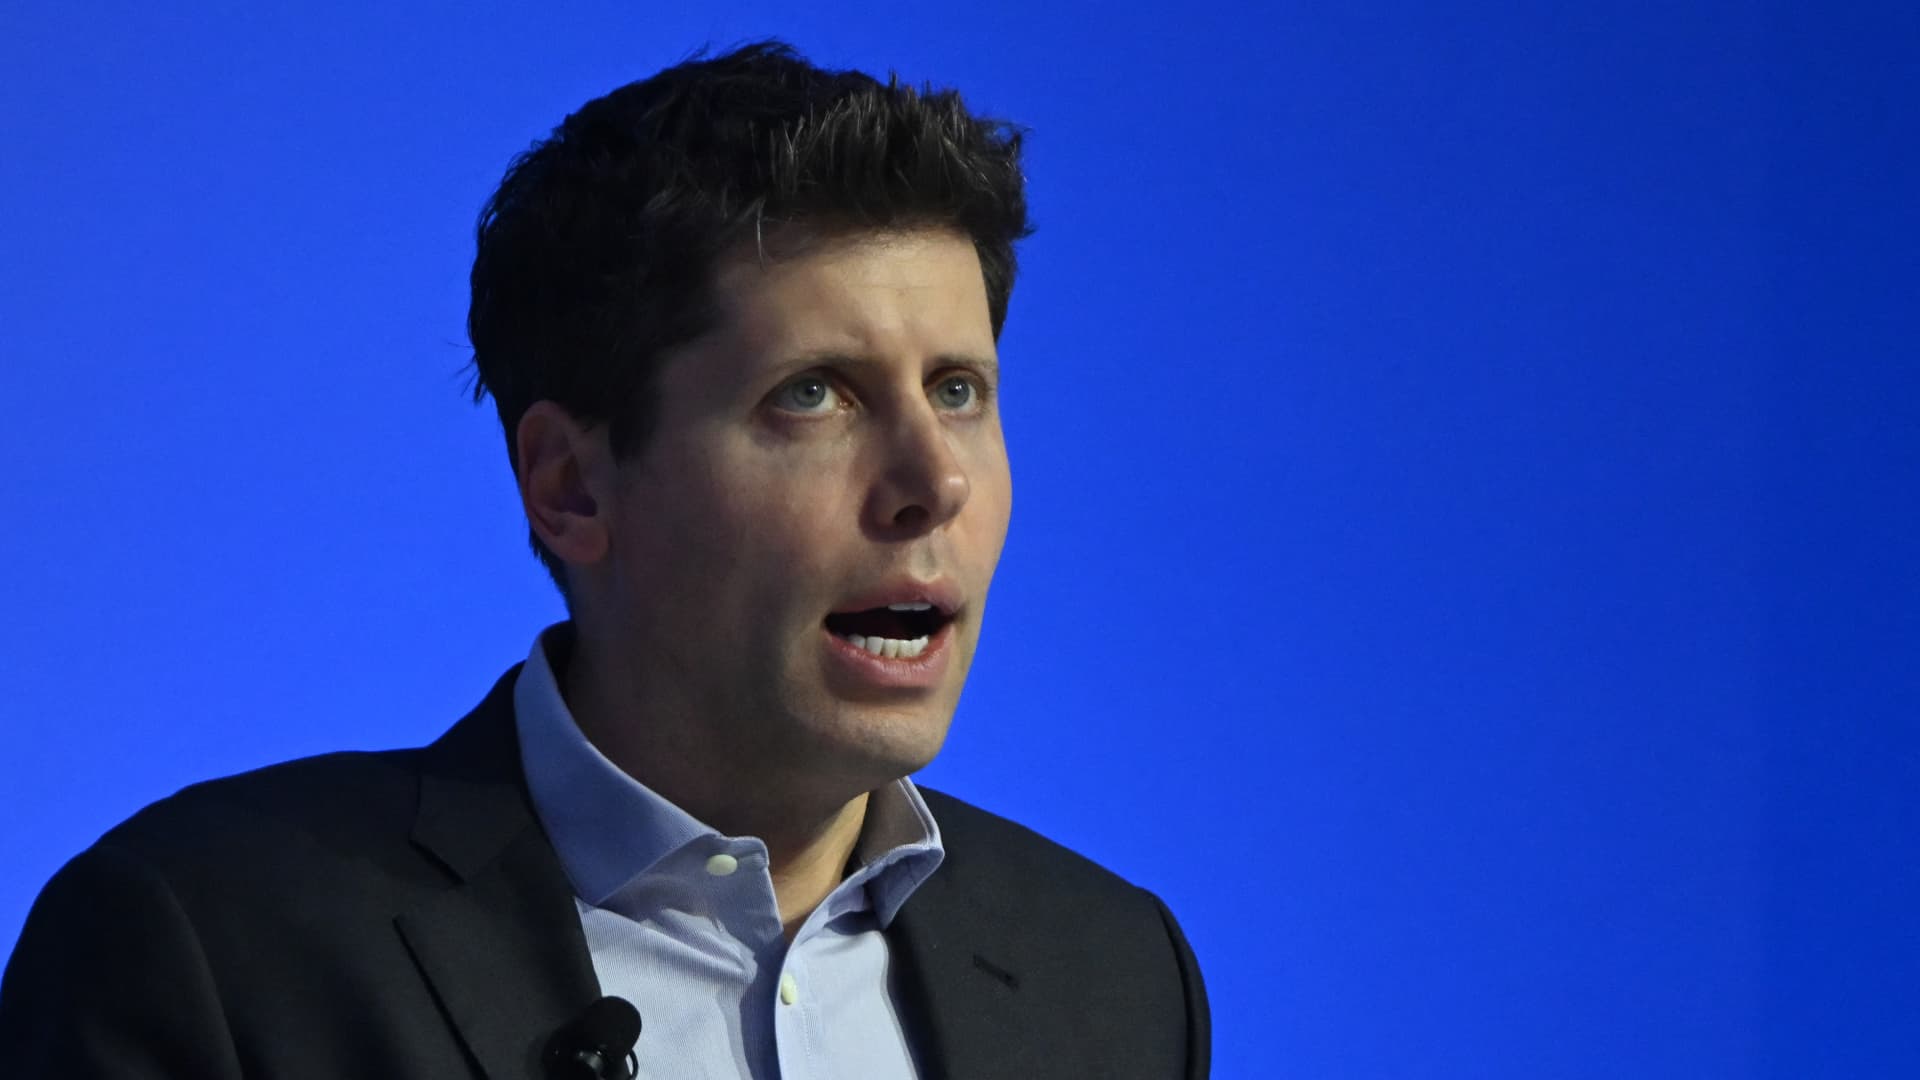 Former OpenAI CEO Sam Altman returns to headquarters for talks following his abrupt ouster